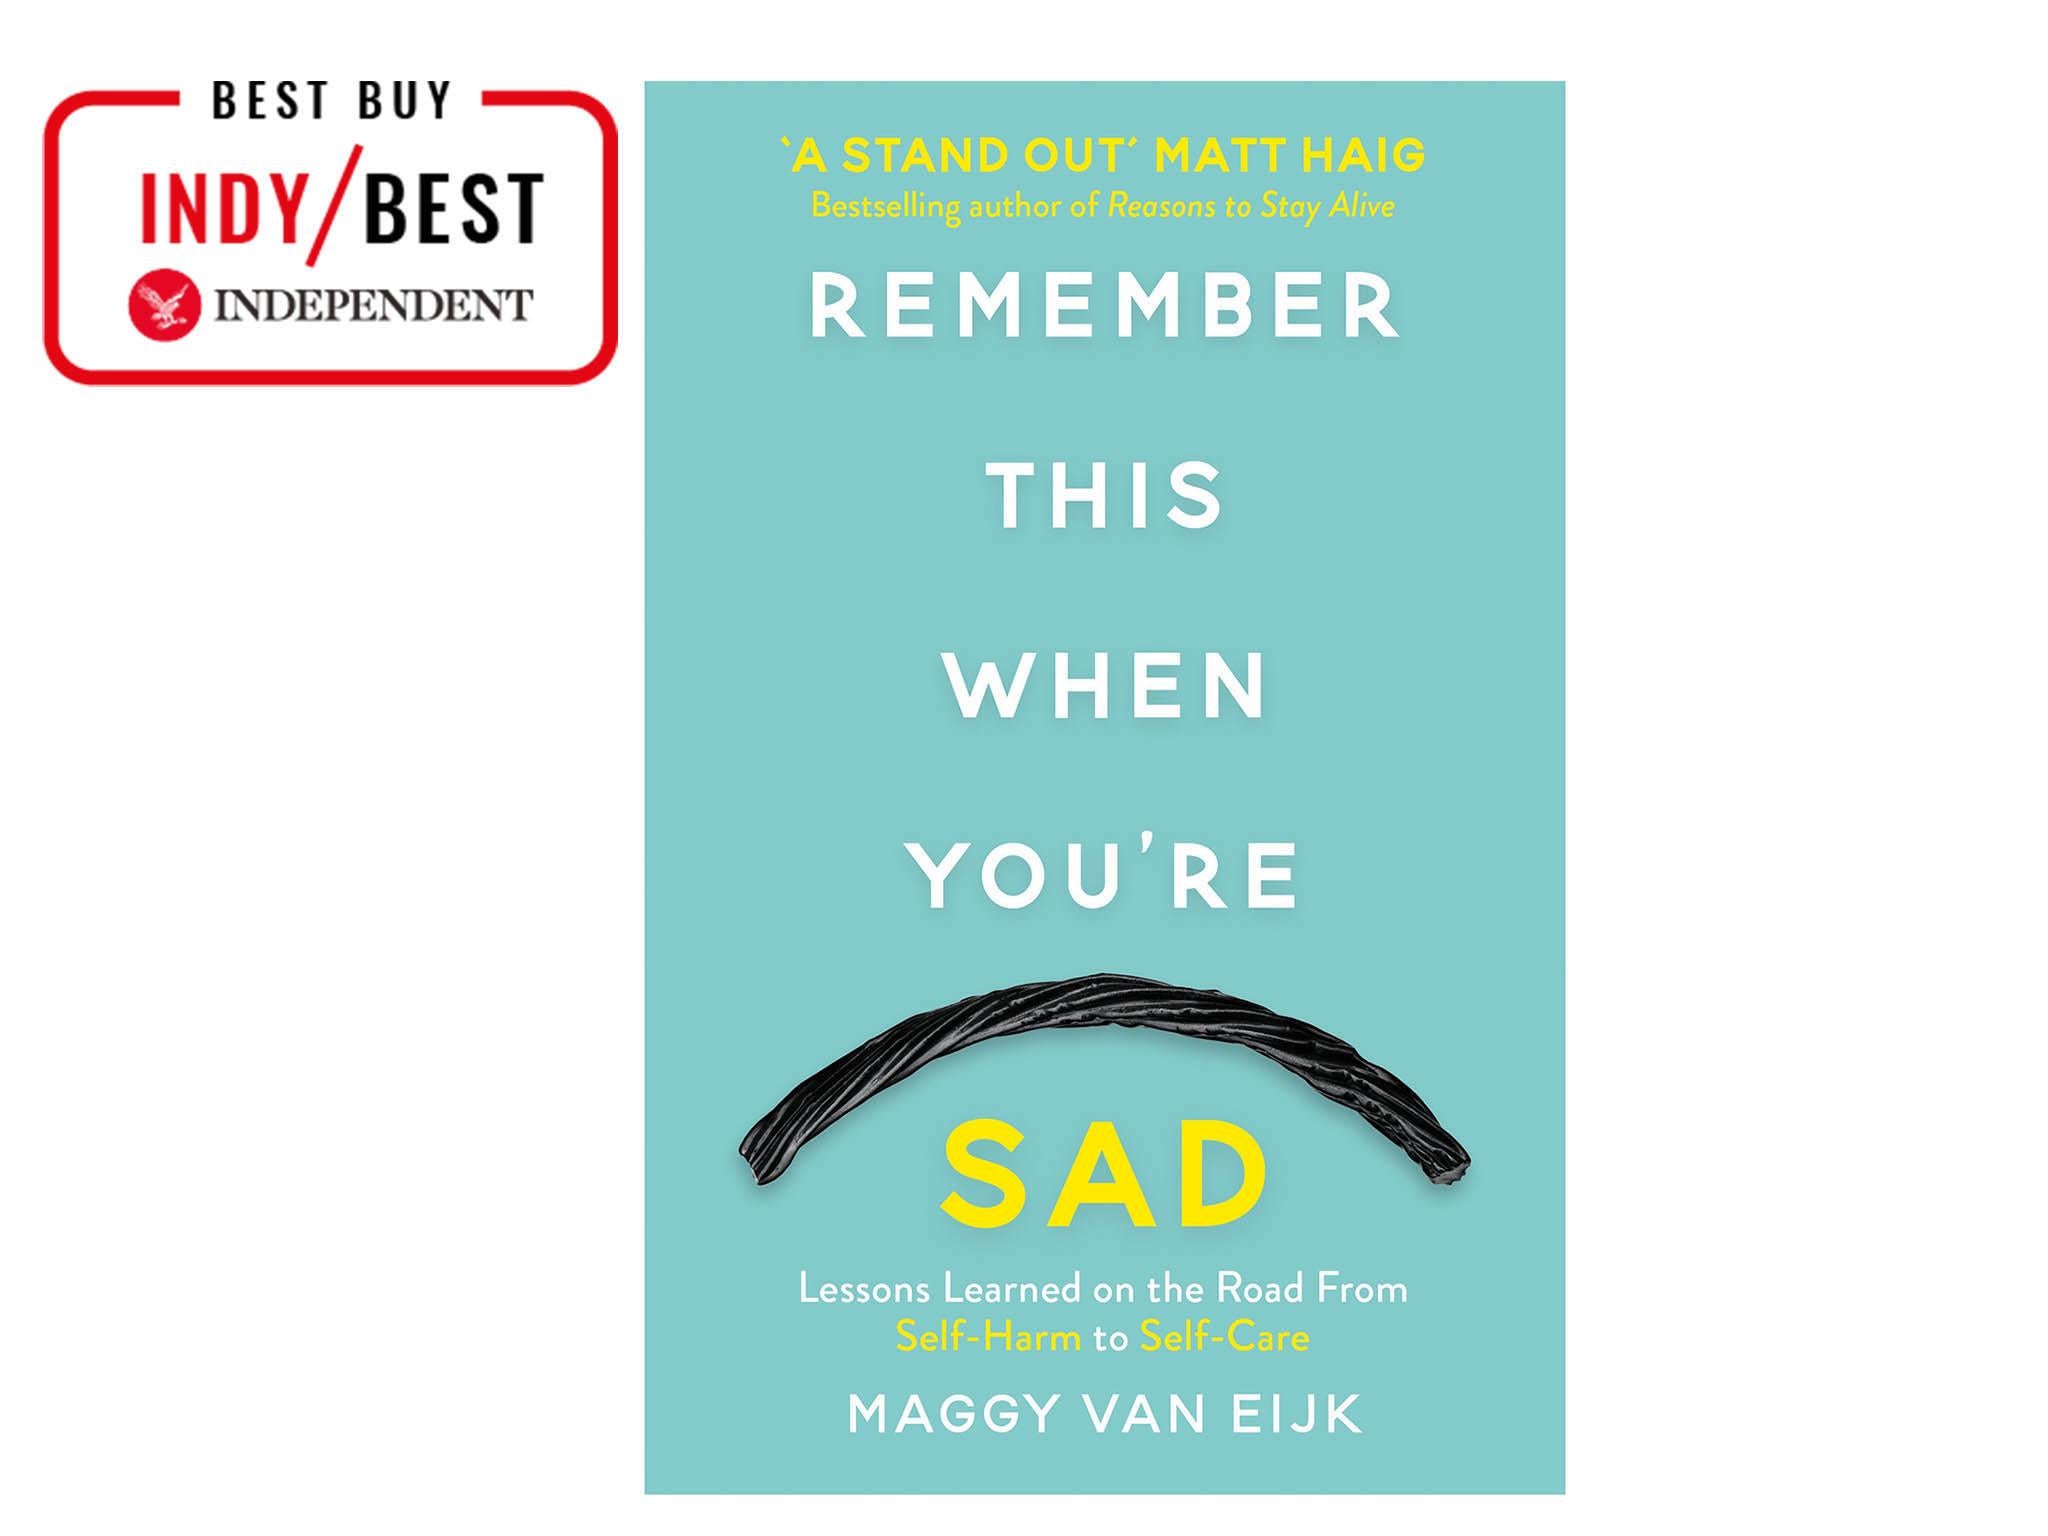 8 Best Self Care Books The Independent - remember this when you re sad lessons learned on the road from self harm to self care by maggy van eijk published by lagom 8 99 paperback whsmith